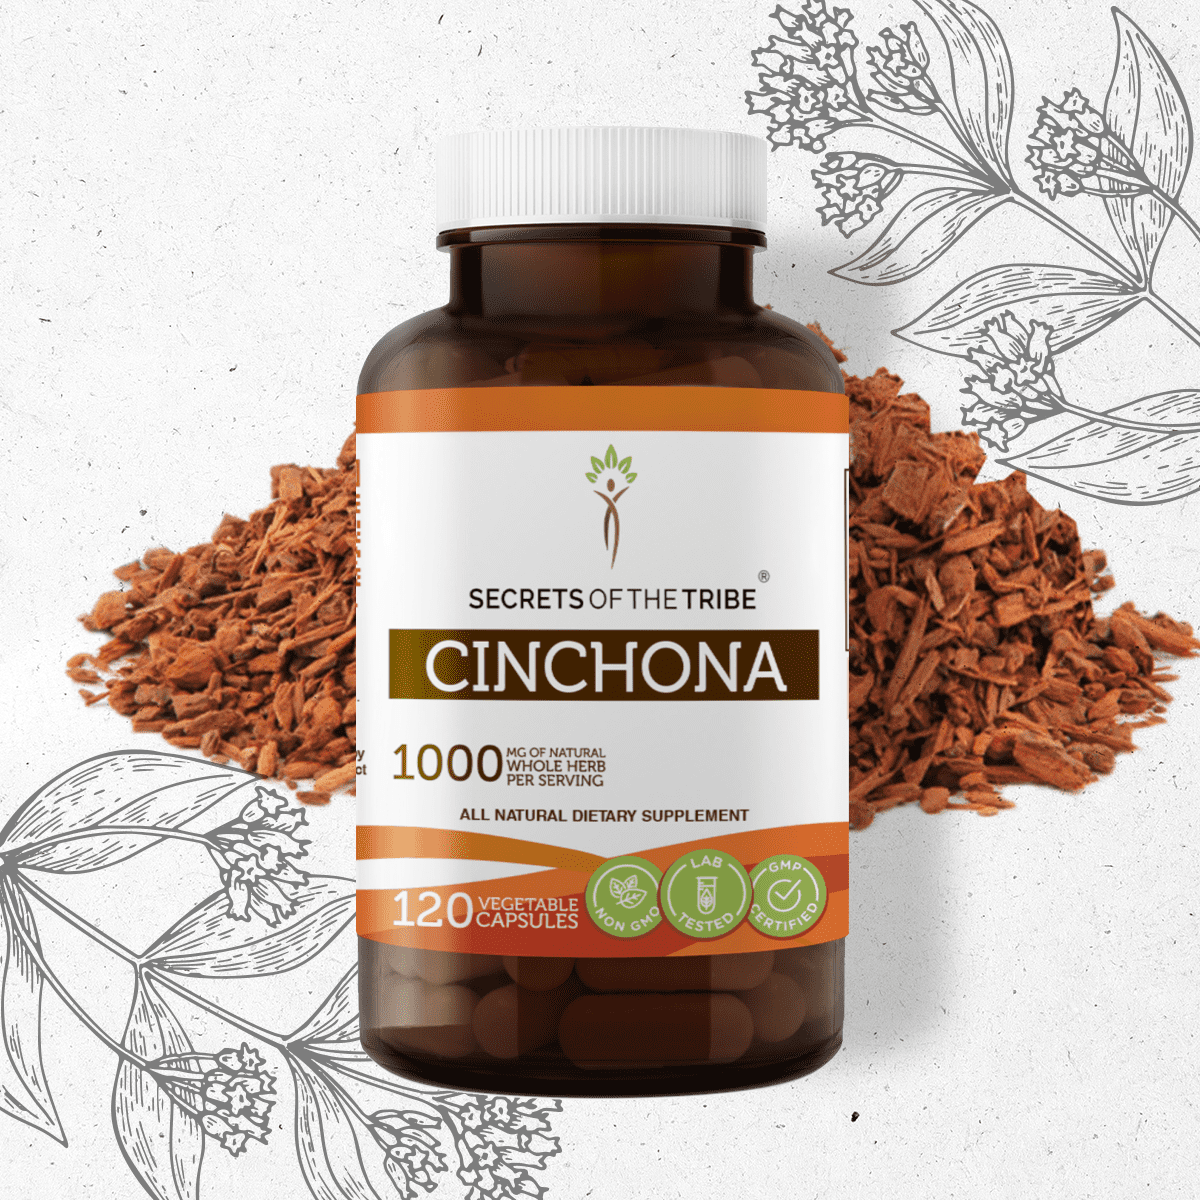 Secrets of the Tribe Cinchona 120 Capsules, Quinine, Quina May Help ...